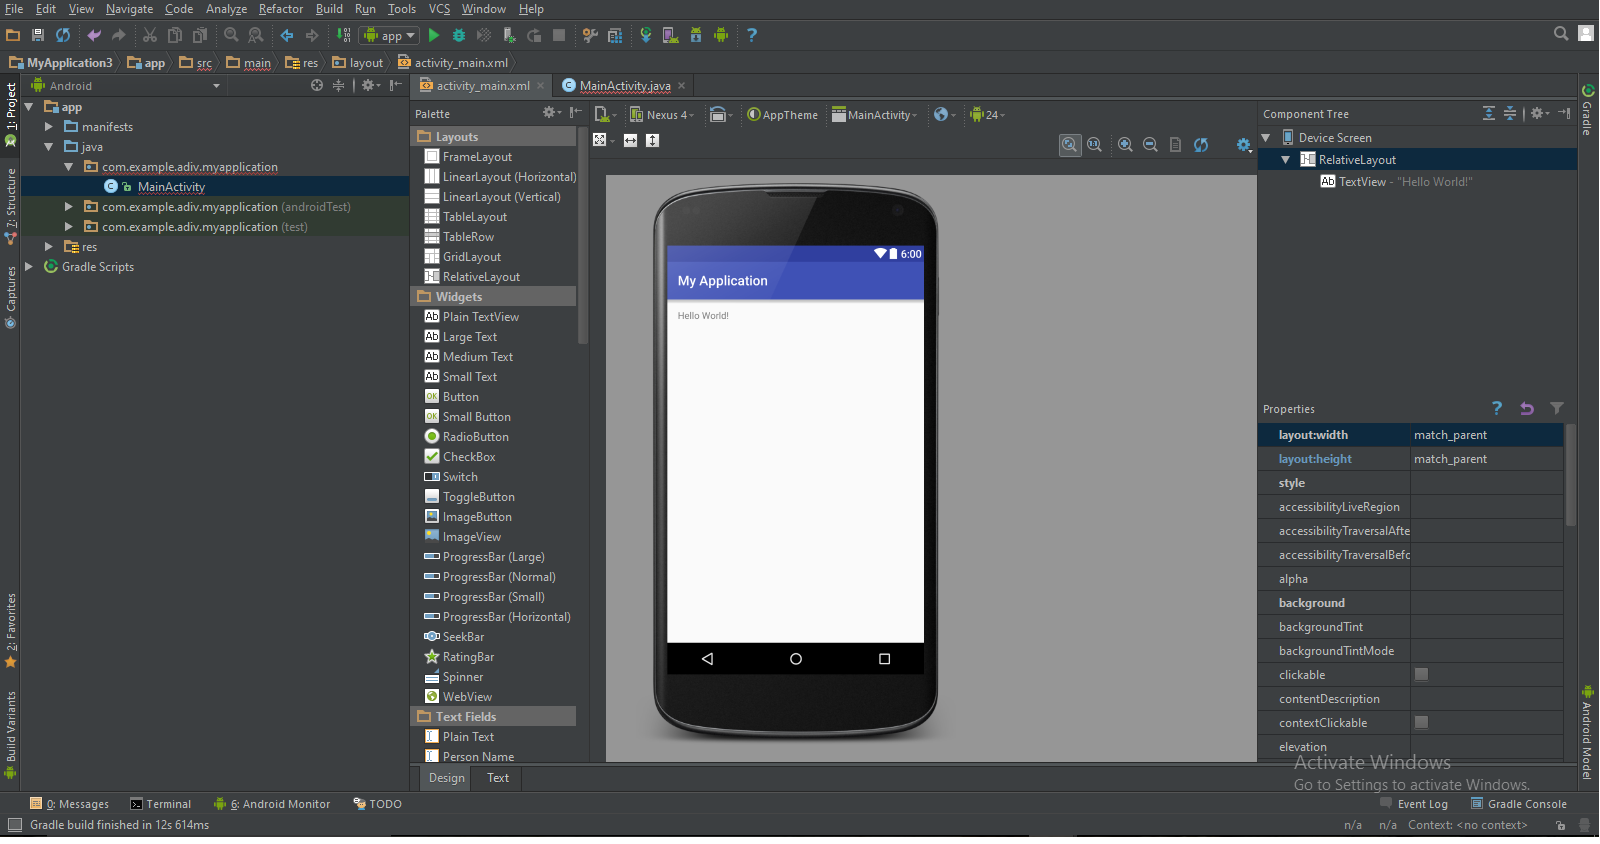 Android App Development with Android Studio | Pluralsight | Pluralsight